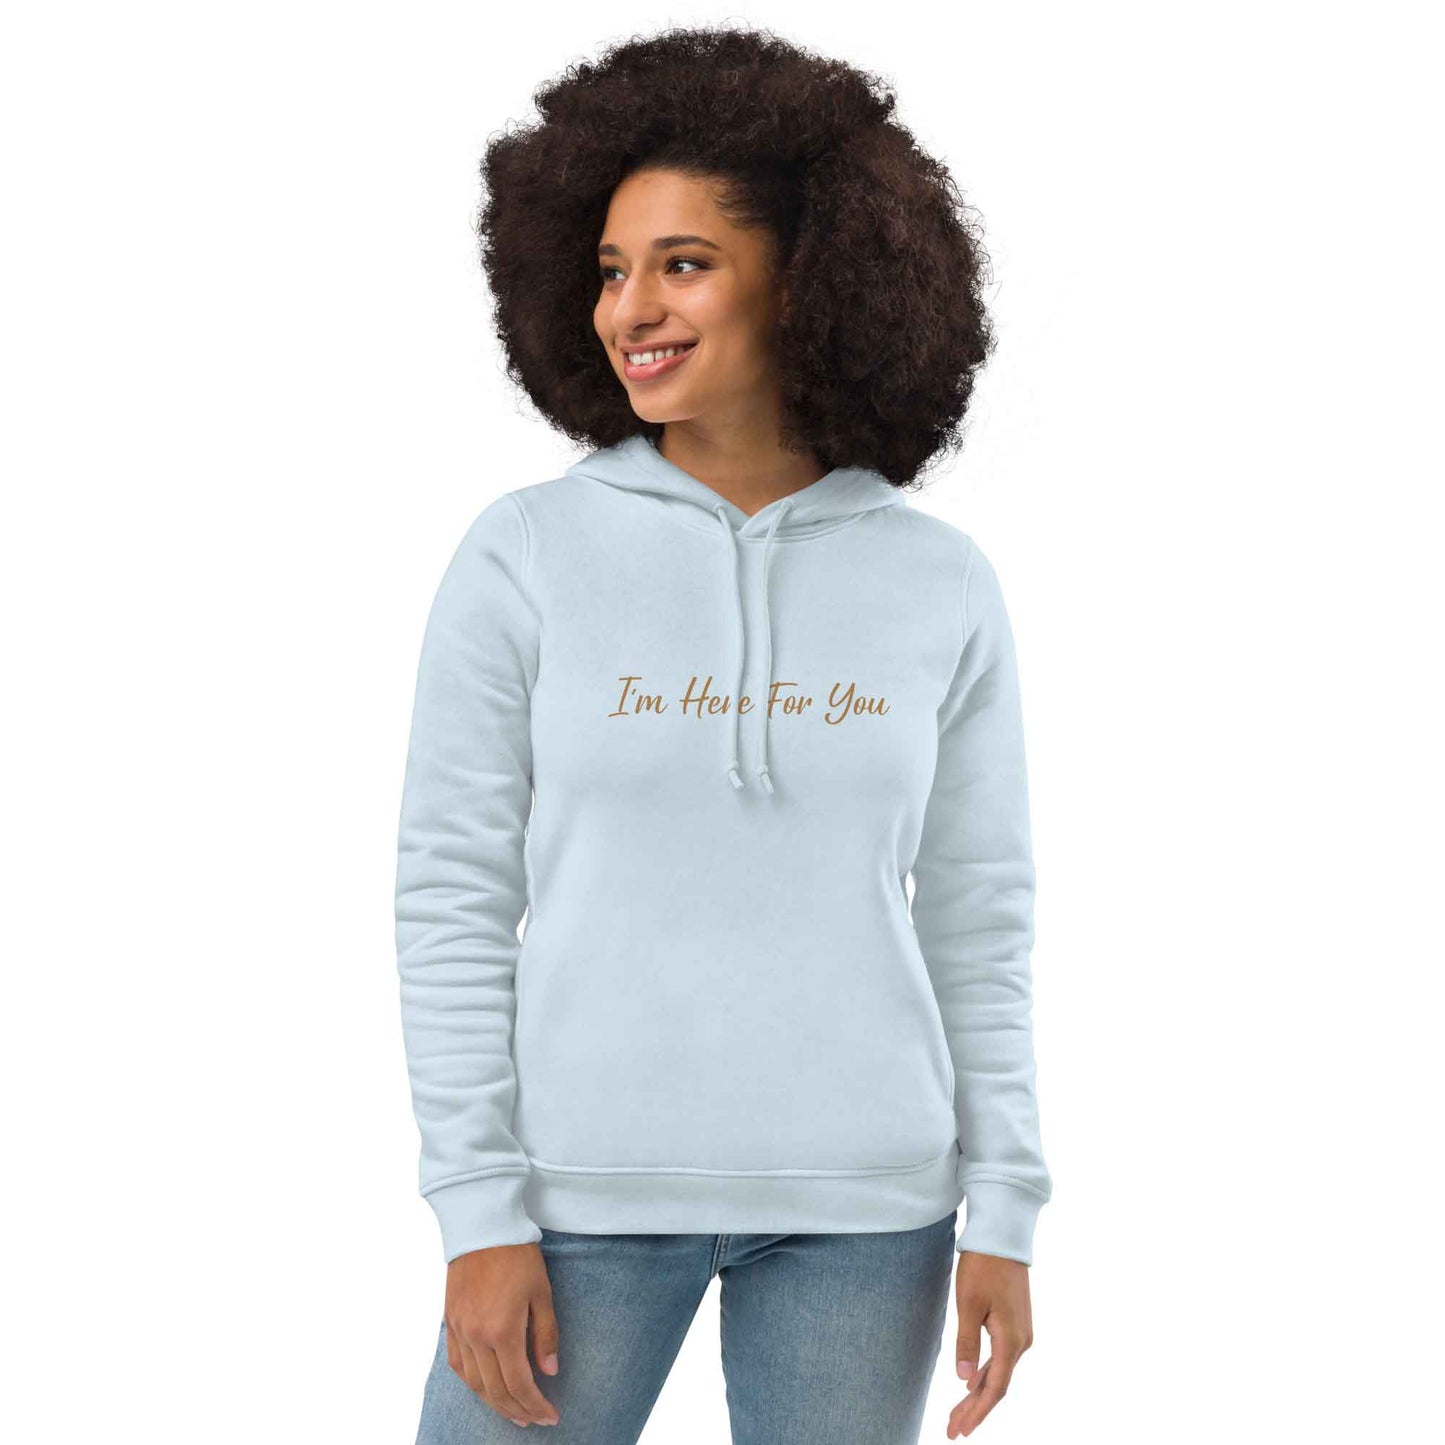 Women blue inspirational hoodie with inspirational quote, "I'm Here For You."